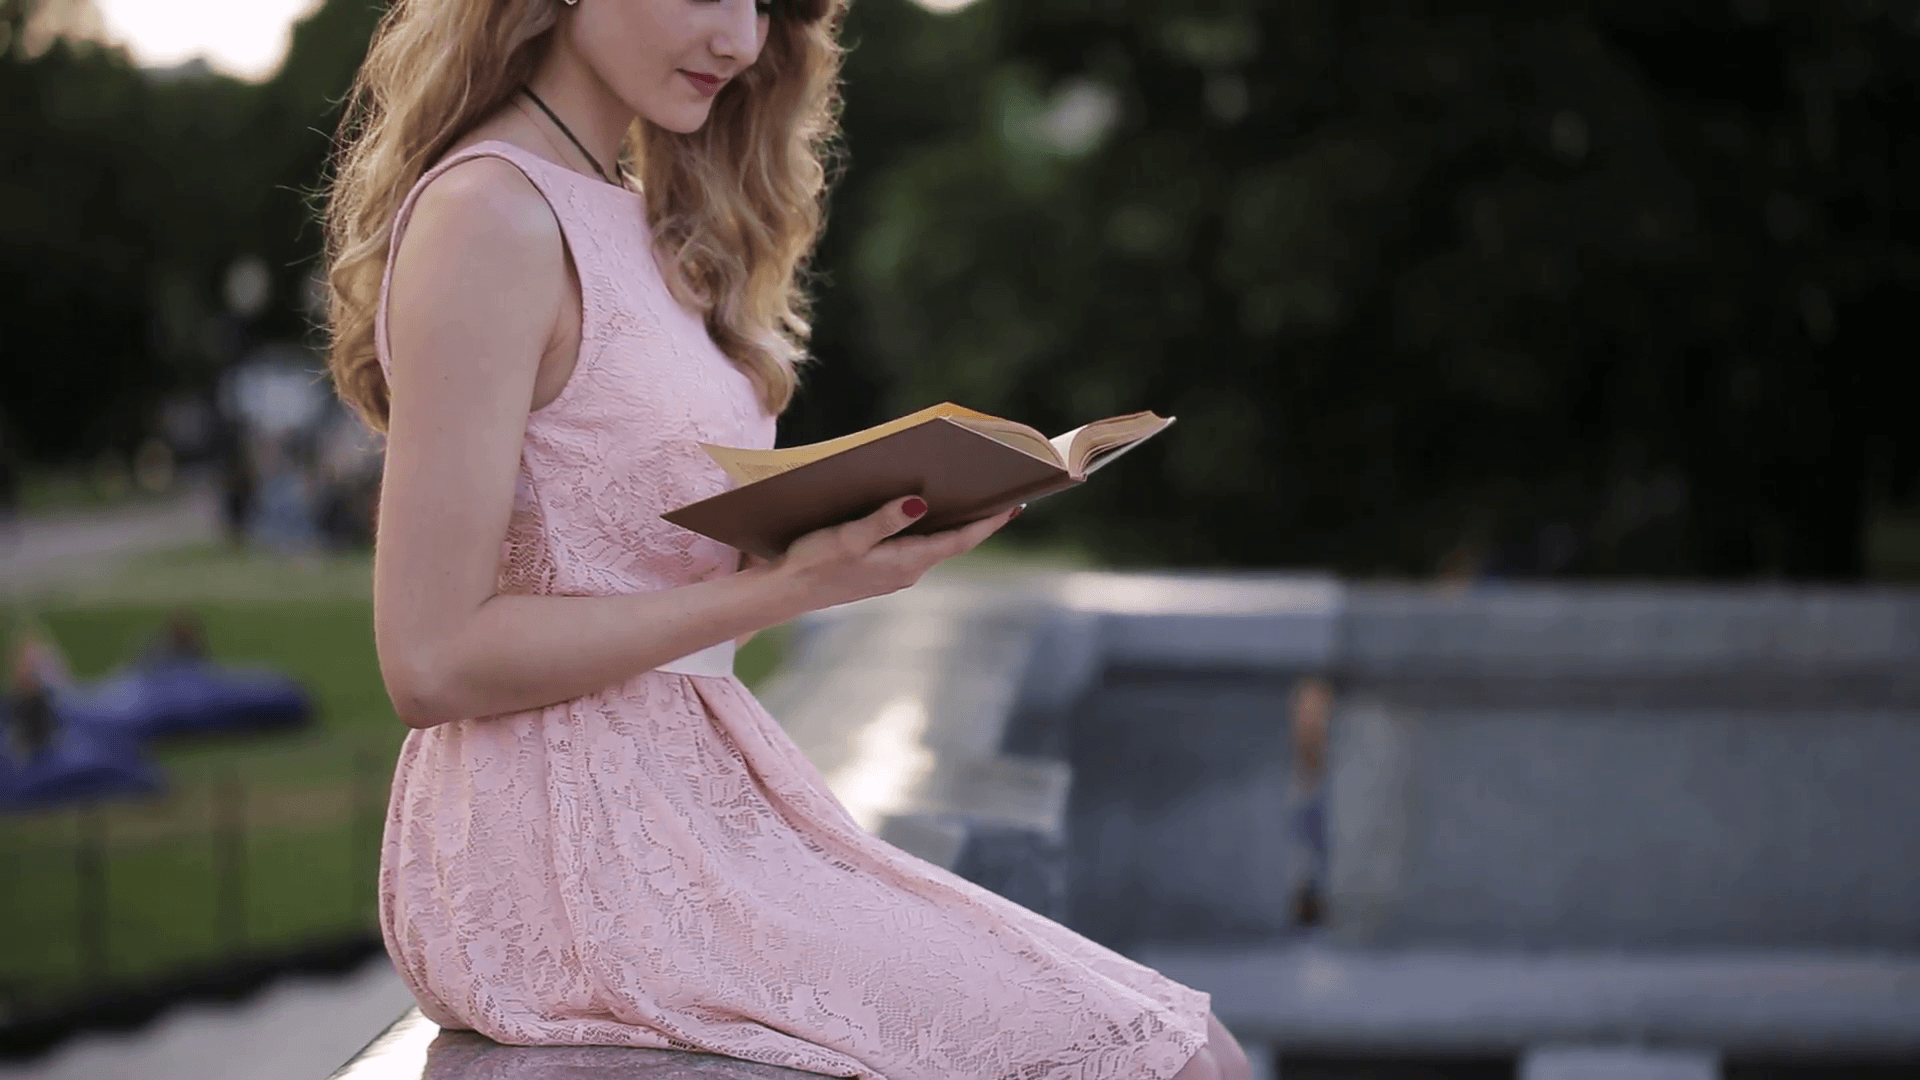 Beautiful girl reading a book in a park and dreaming about love